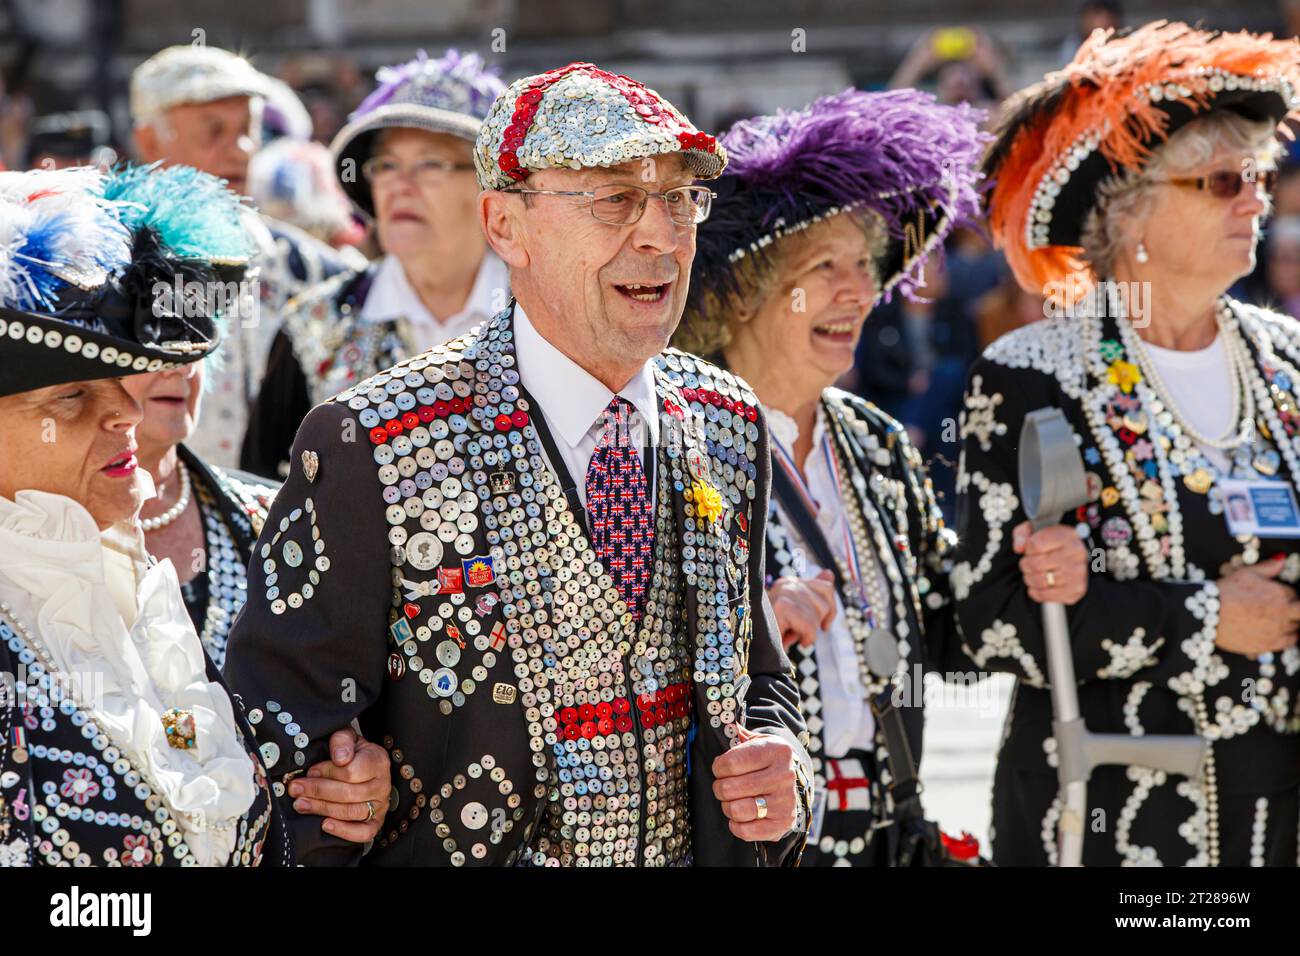 Pearly Kings and Queens at the Pearly Kings and Queens Harvest Festival at Guildhall Yard, London, England. Stock Photo